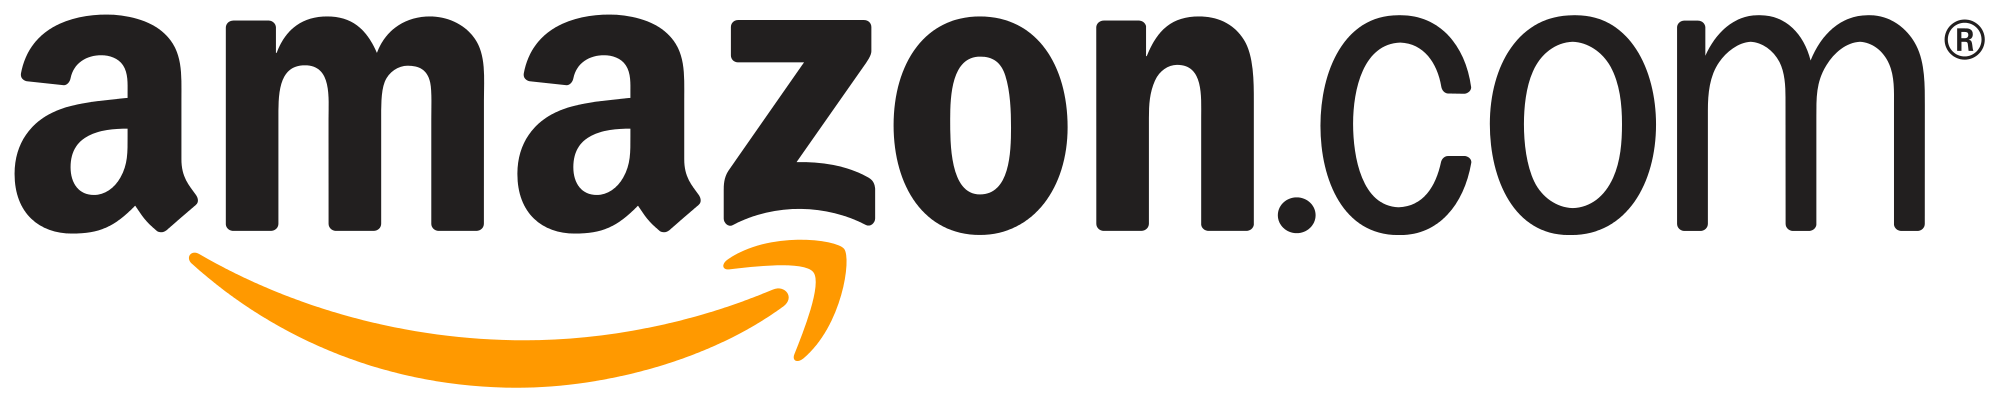 Amazon Logo Png Images Free Download - Amazon, Transparent background PNG HD thumbnail